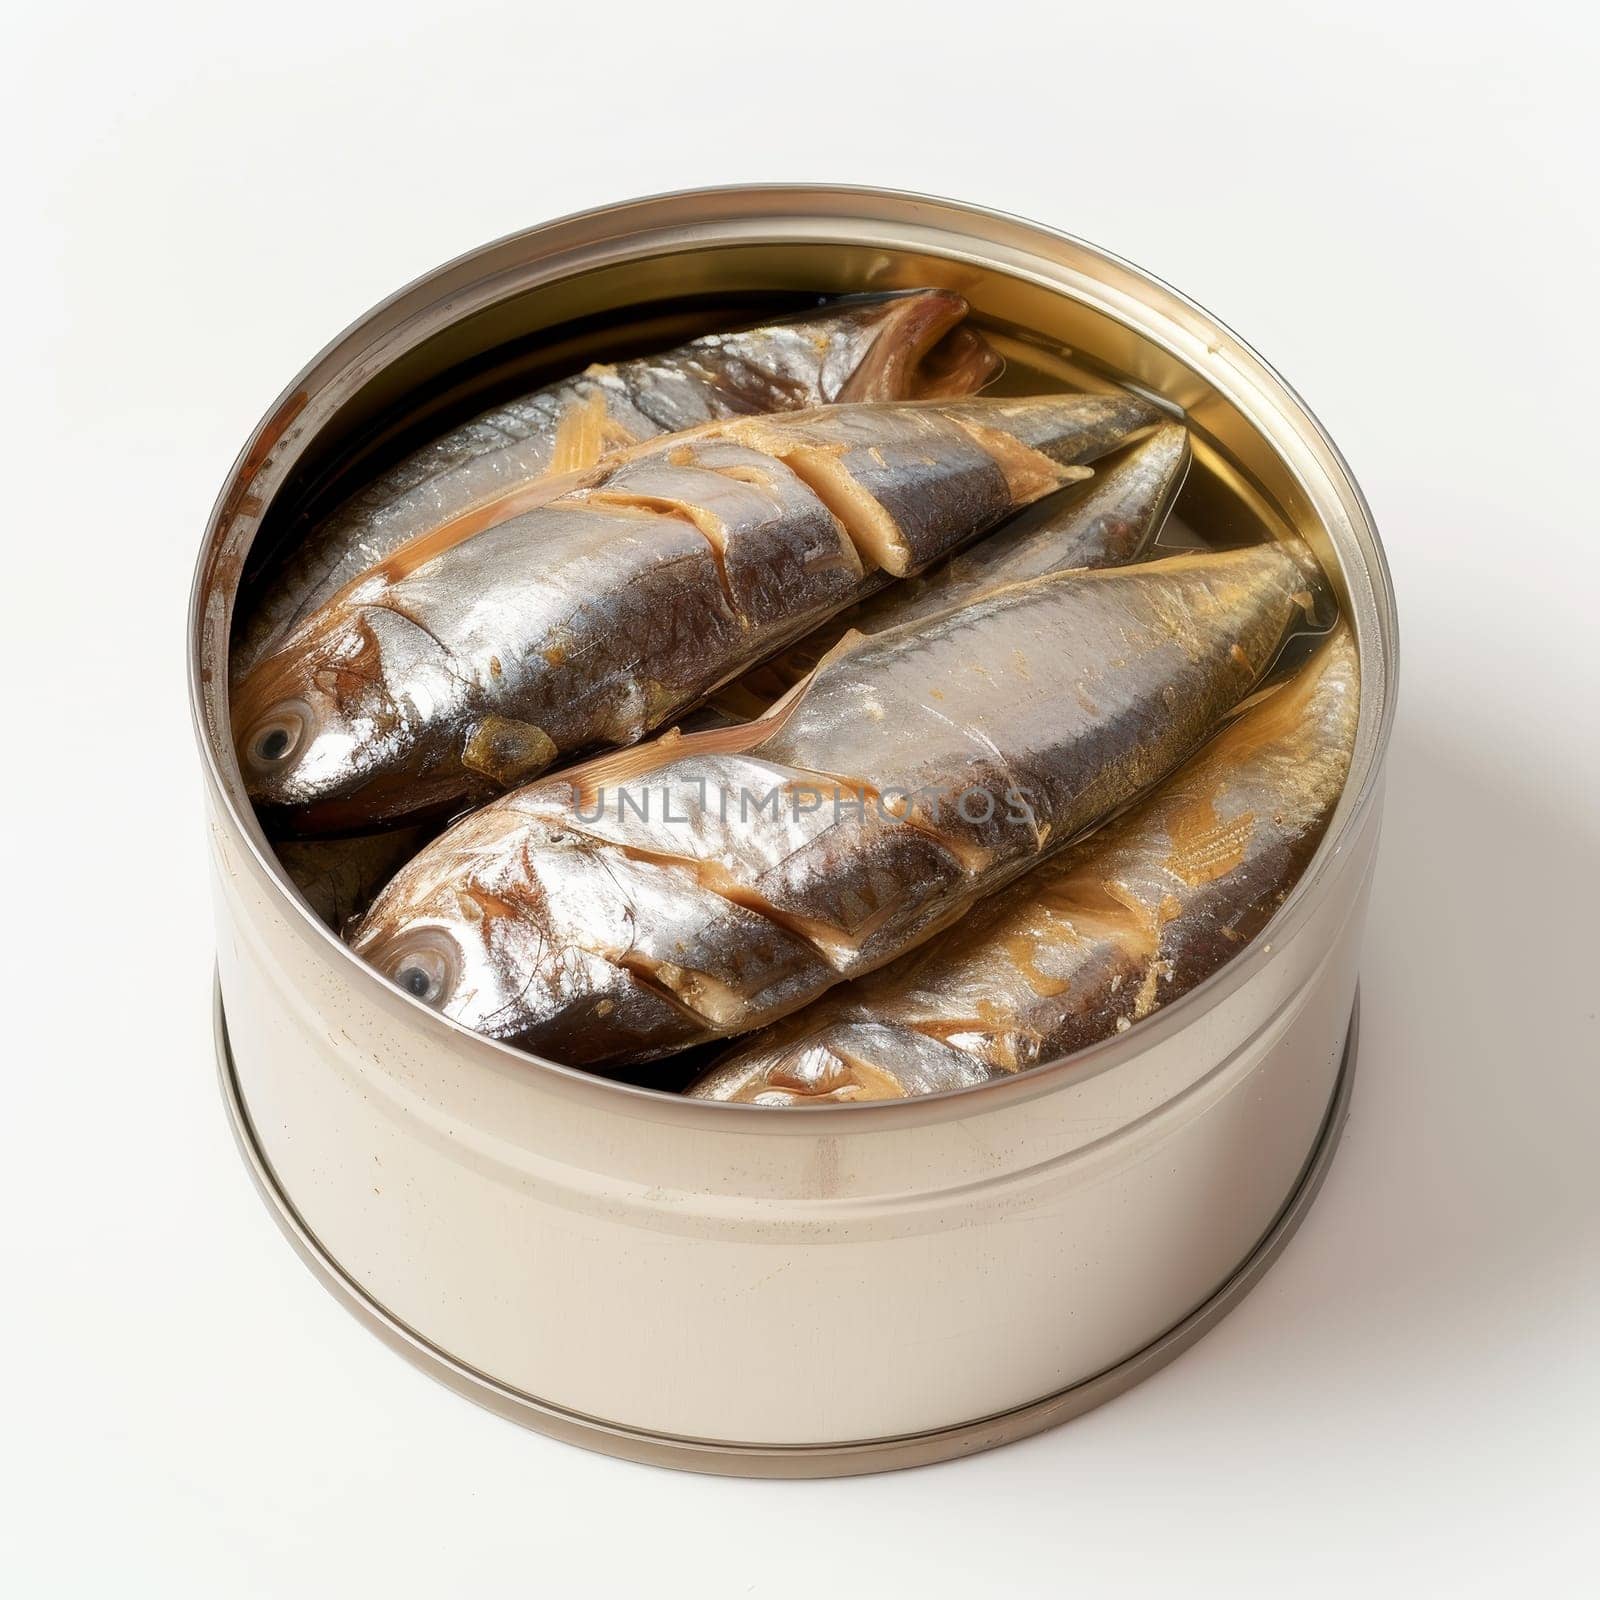 Open can revealing whole mackerel fish in oil, isolated on a white background.. by sfinks